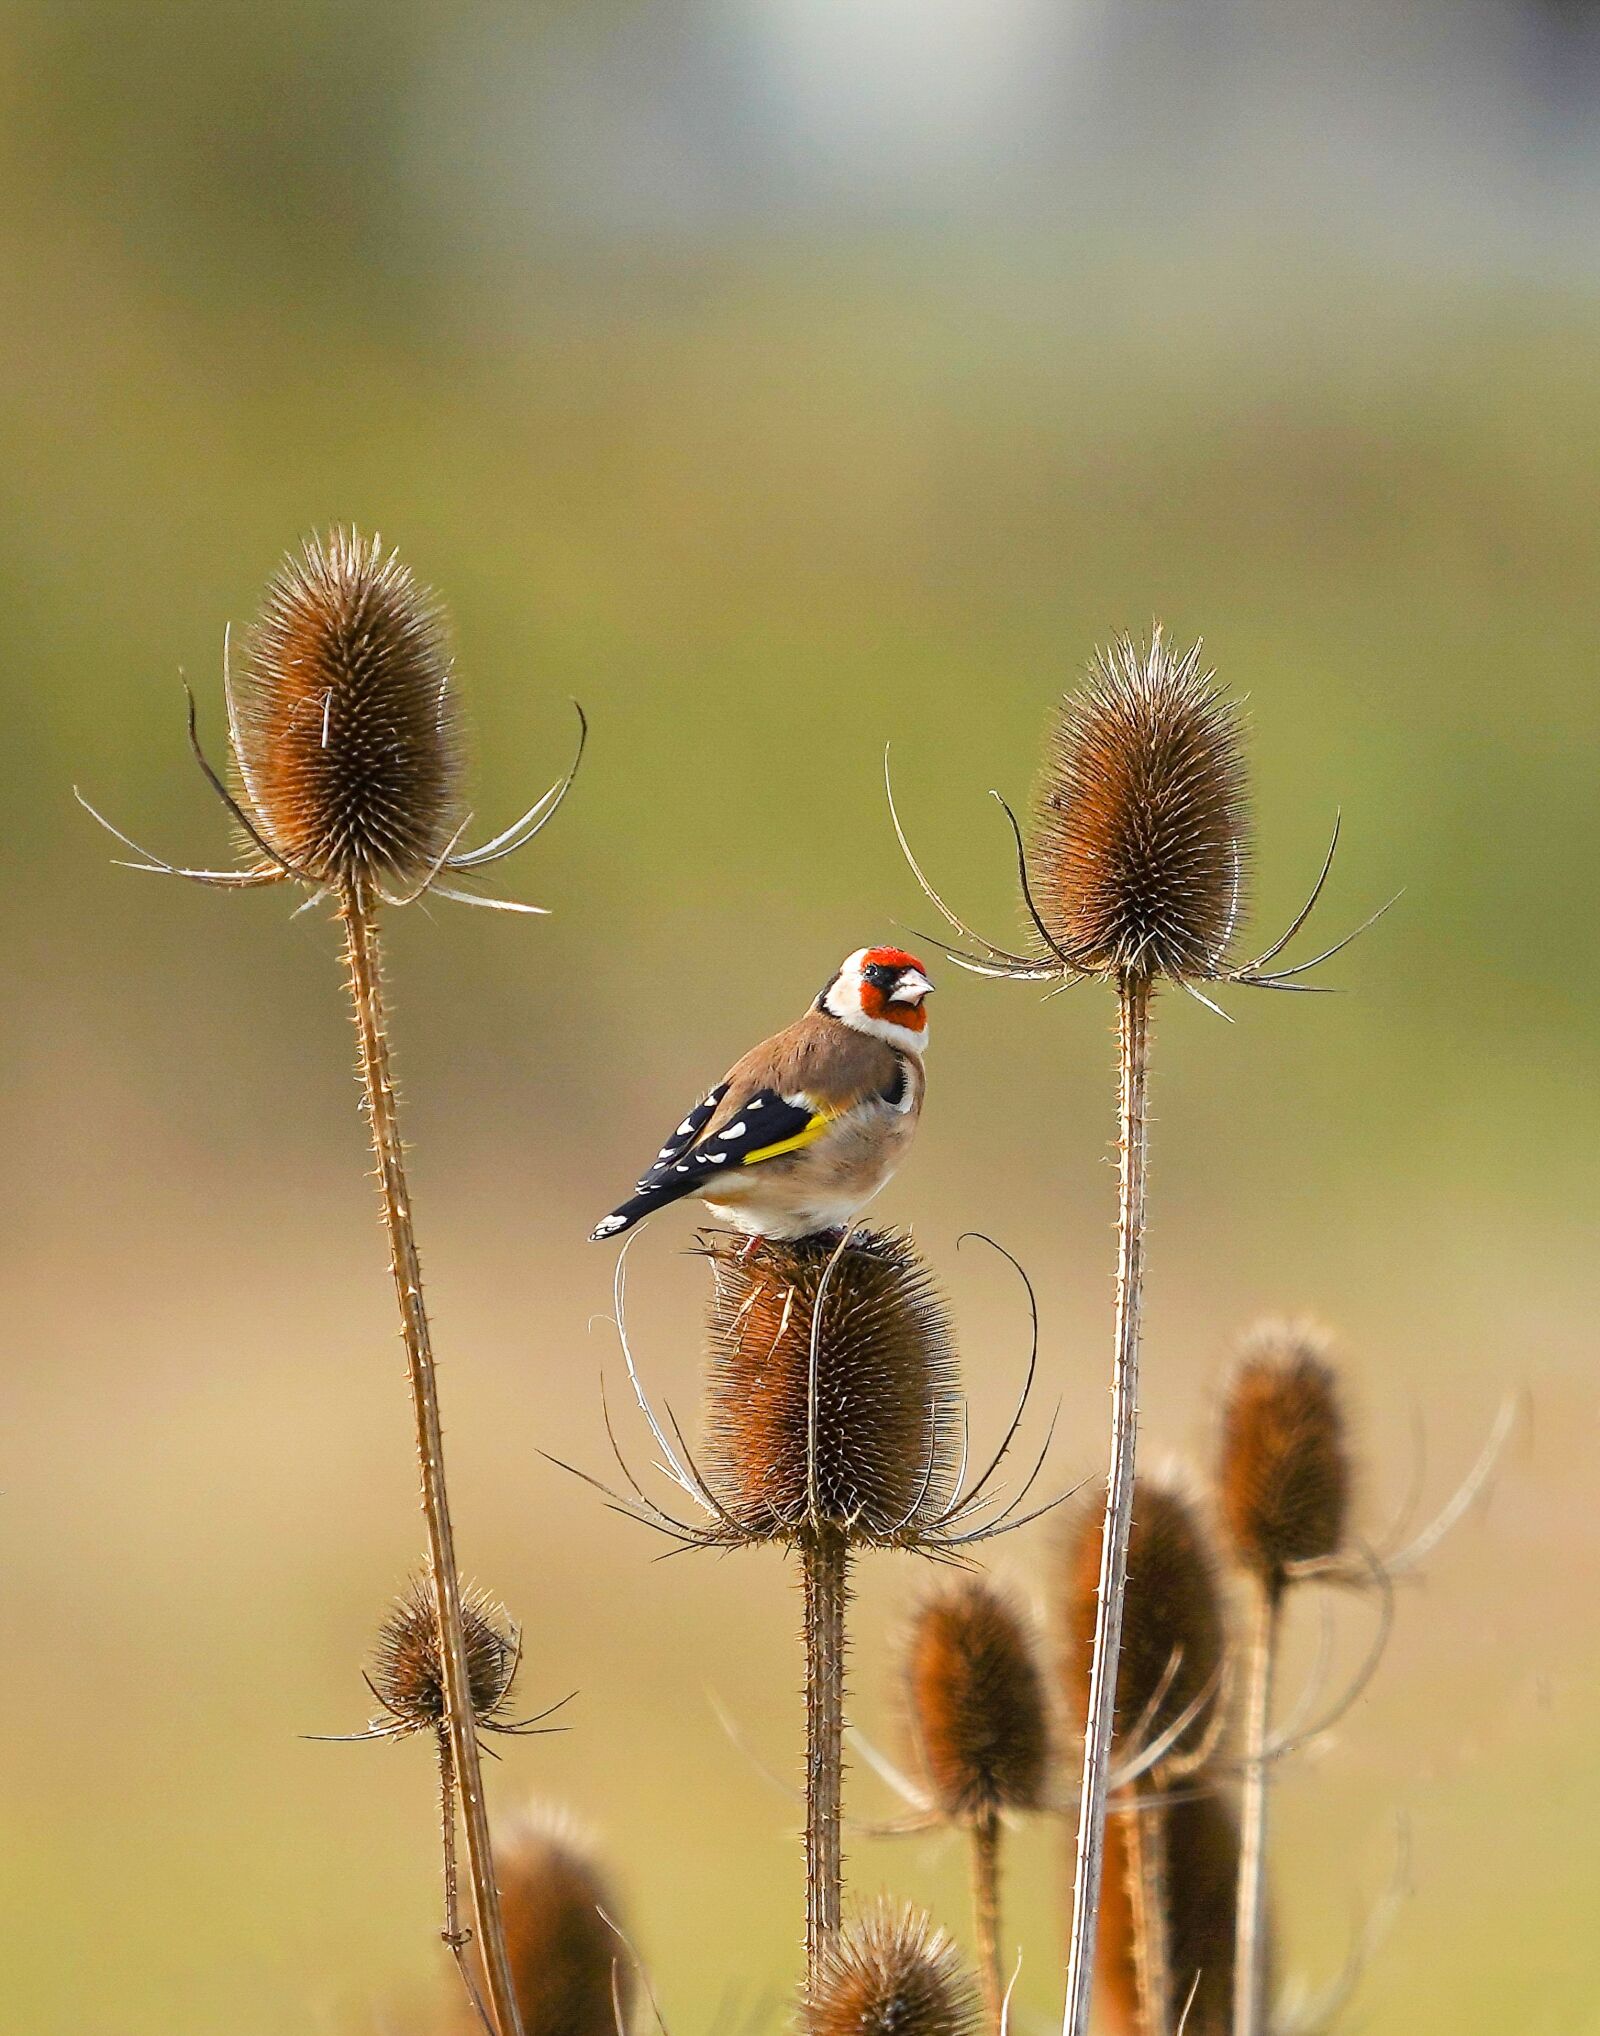 Sony a7 III sample photo. Bird, goldfinch, nature photography